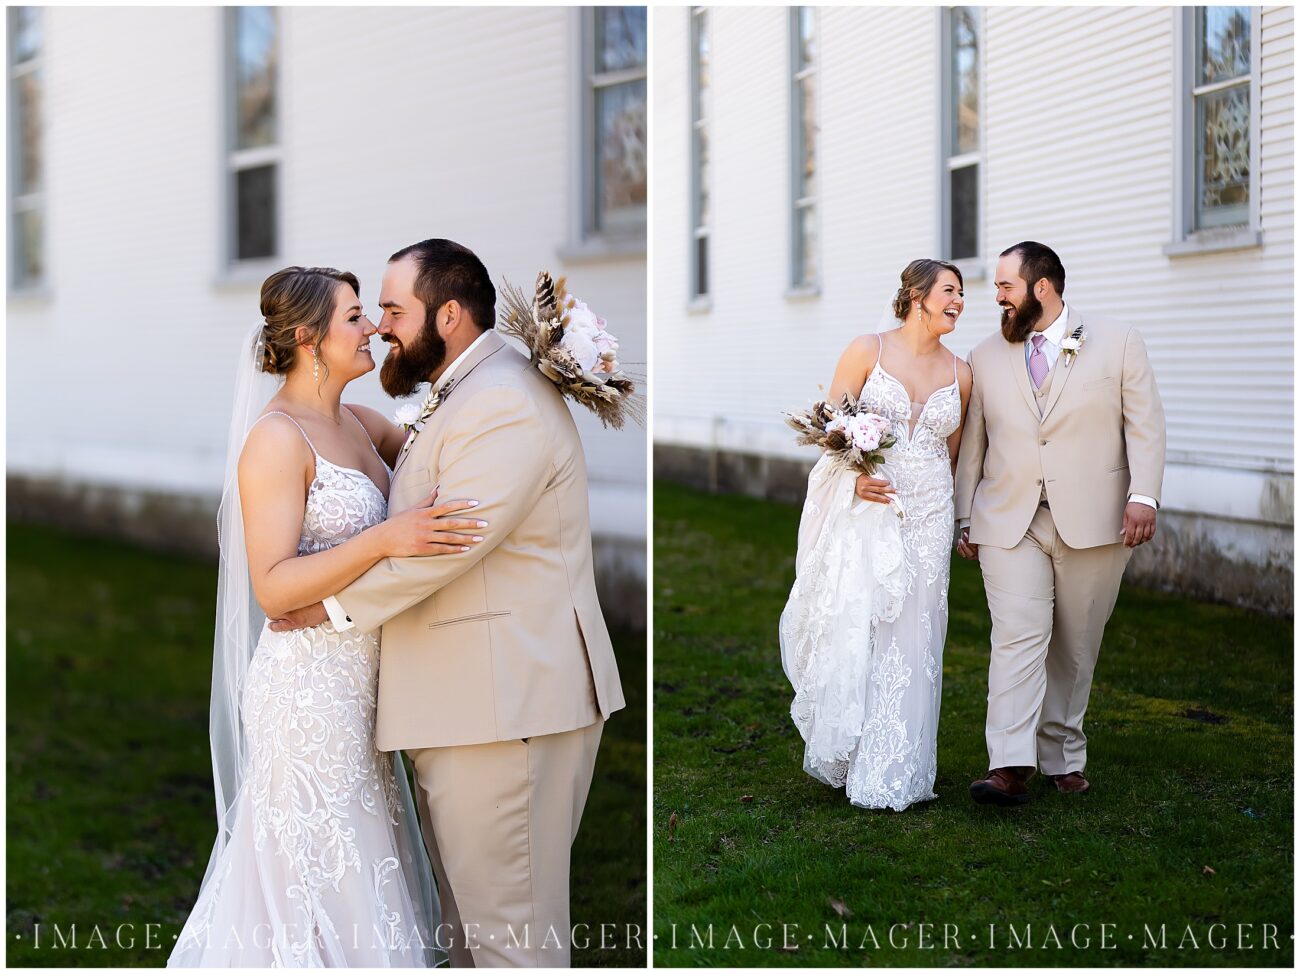 A small town wedding for Casey and Adam. A collage of two portraits of the bride and groom by the side of the white church. The first of them face to face and the second of them walking and laughing.

Saint John the Baptist Catholic Church, L'erable, IL. 

Photo taken by Mager Image Photography.